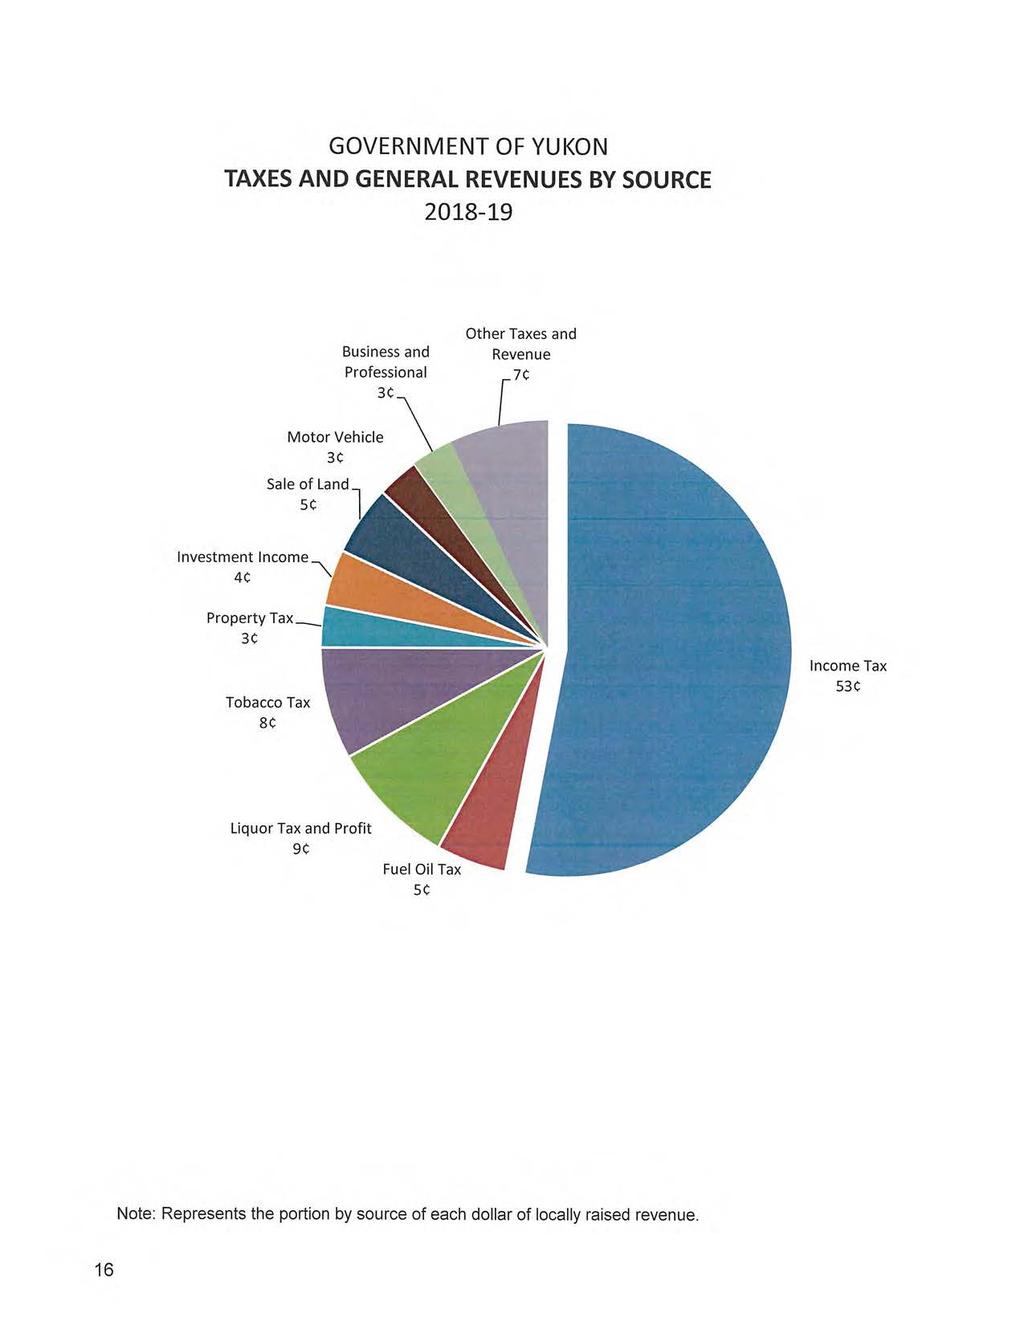 GOVERNMENT OF YUKON TAXES AND GENERAL REVENUES BY SOURCE 2018-19 Business and Other Taxes and Revenue 7C Motor Vehicle 3C Sa le of Land sc Investment Income